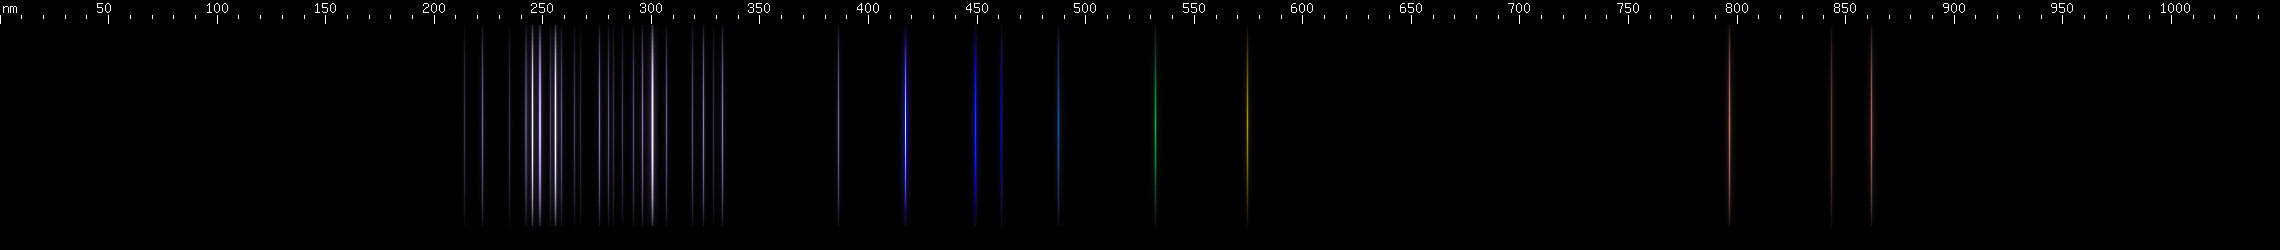 Spectral lines of Polonium.